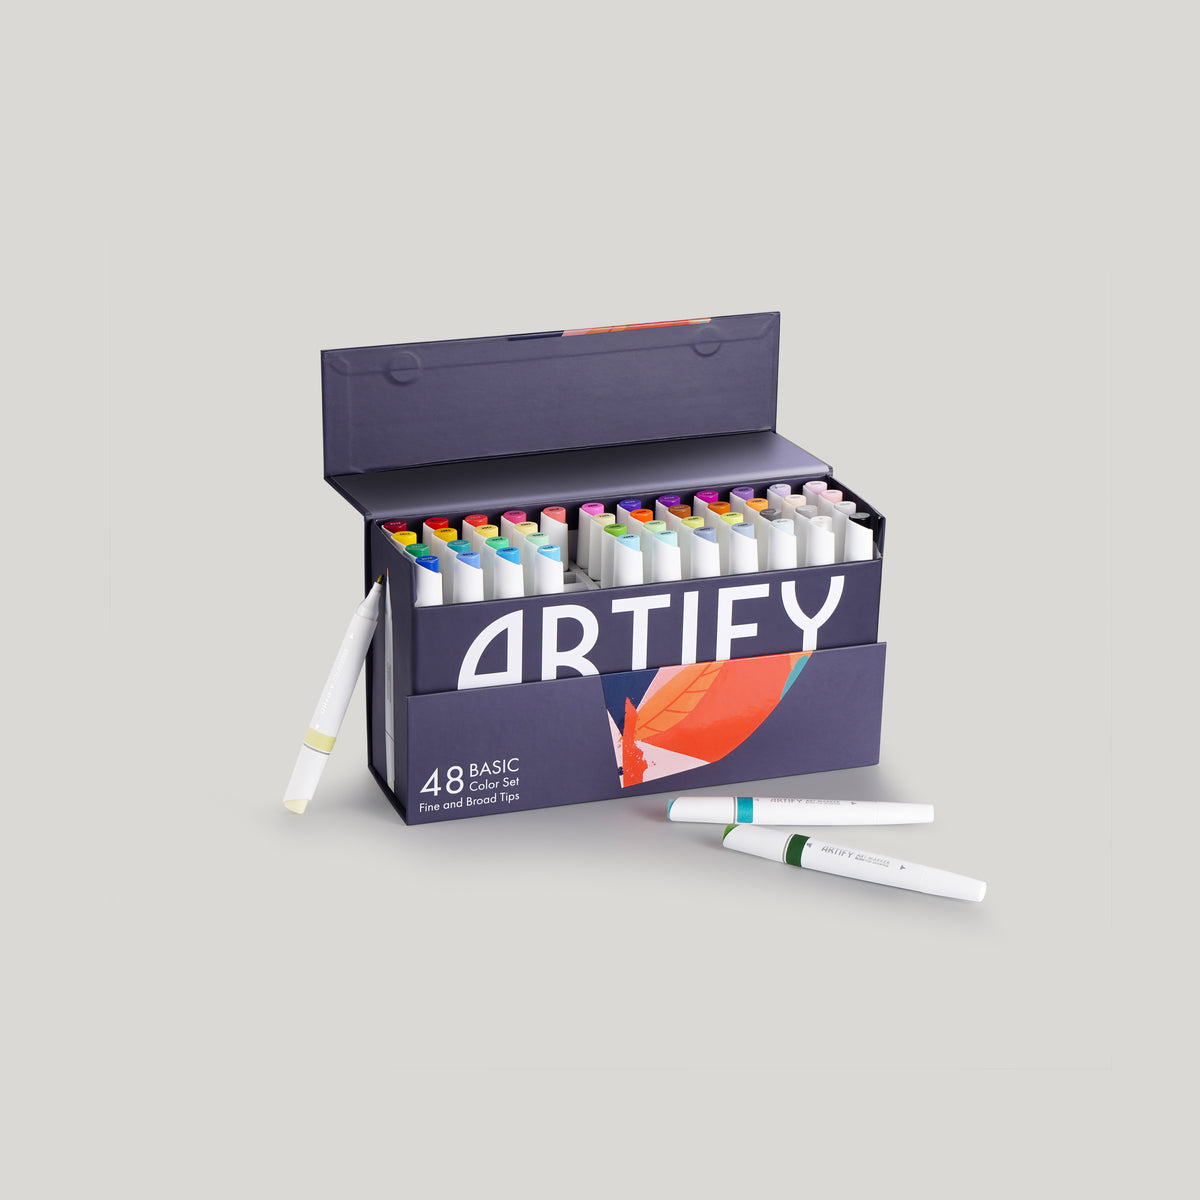  ARTIFY 48 colors Alcohol Brush Markers, Brush & Chisel Dual  Tips Professional Artist Markers, Drawing Marker Set with Carrying Bag for  Adult, Beginner or Experienced Artists : Arts, Crafts & Sewing